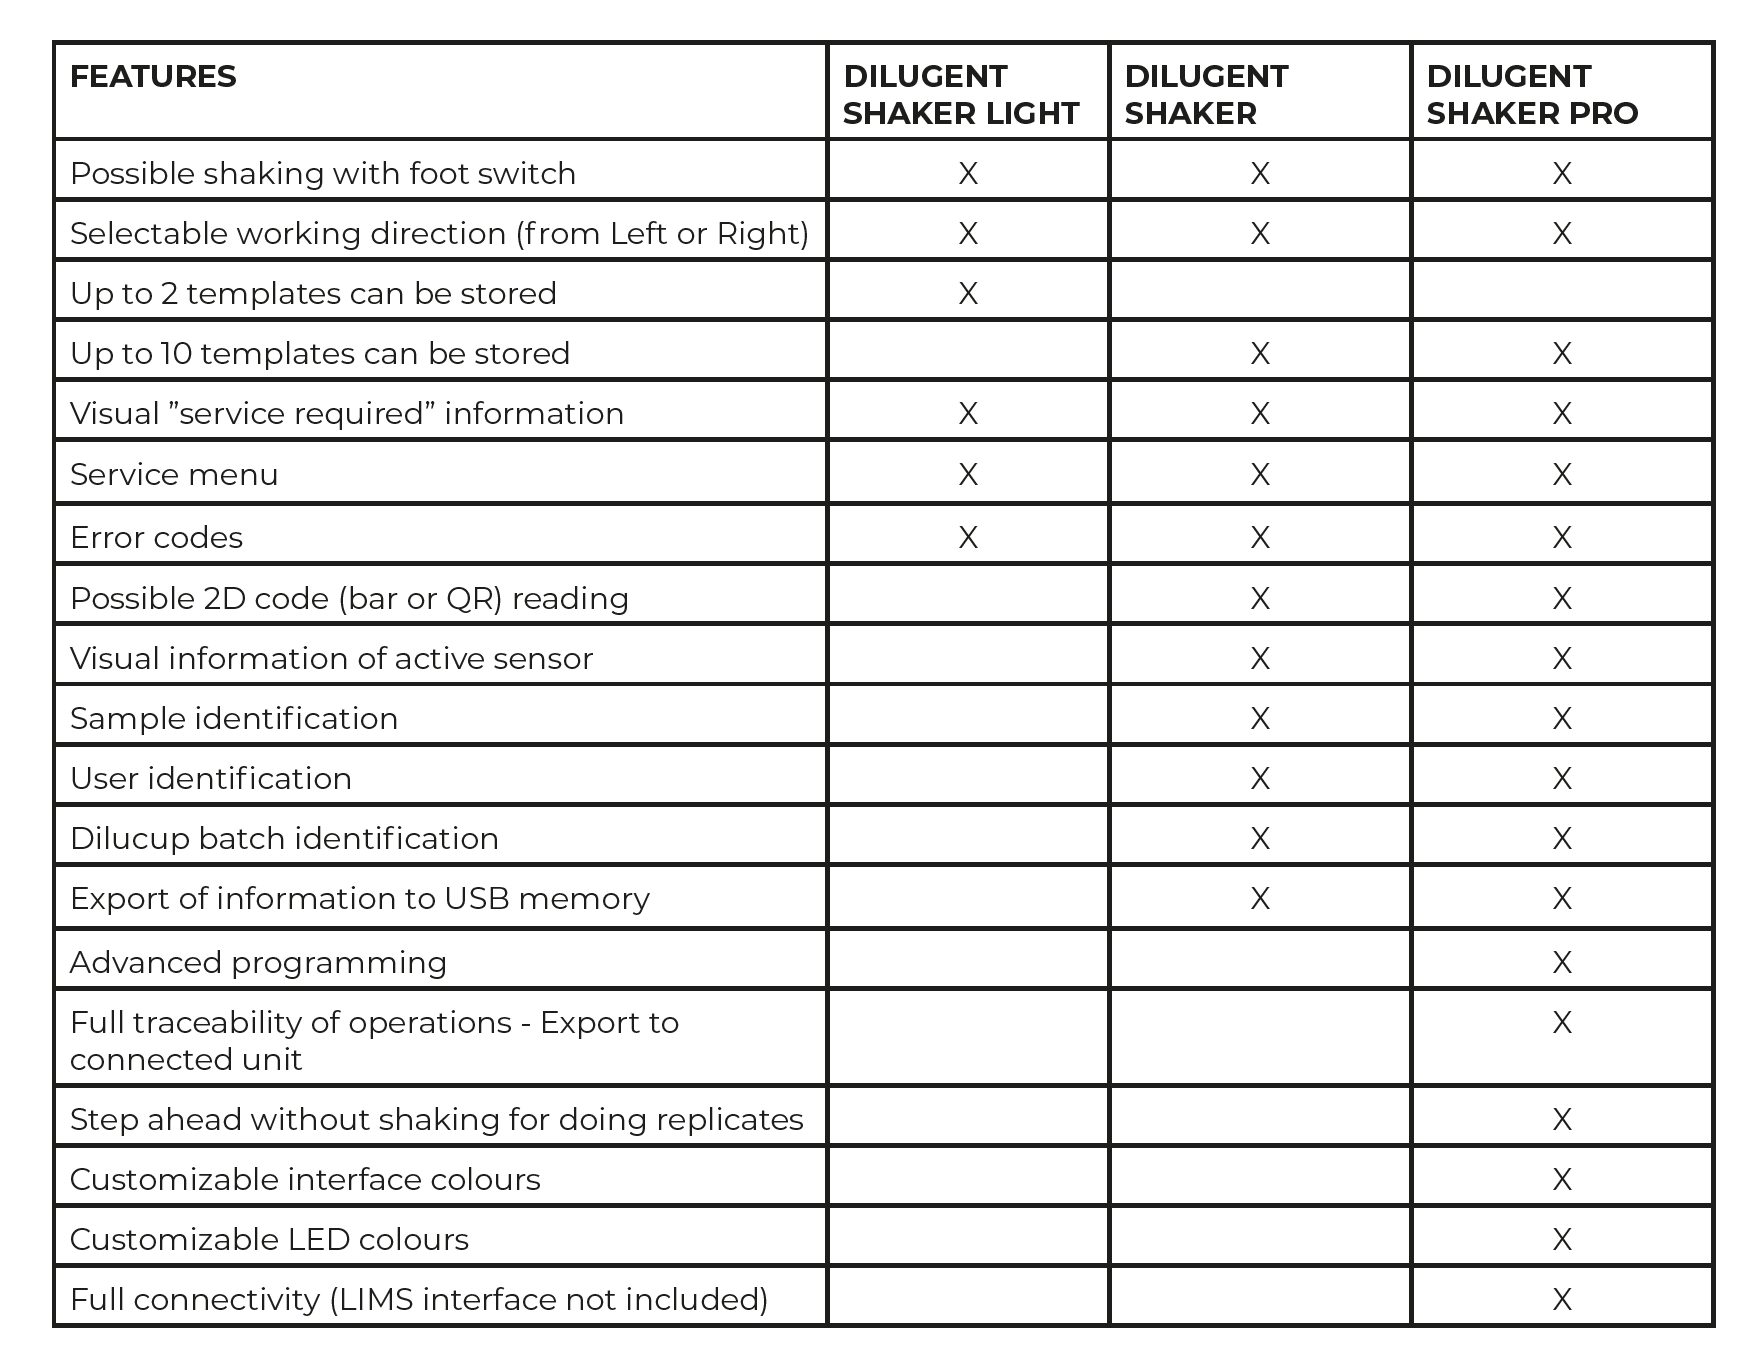 Table of Features